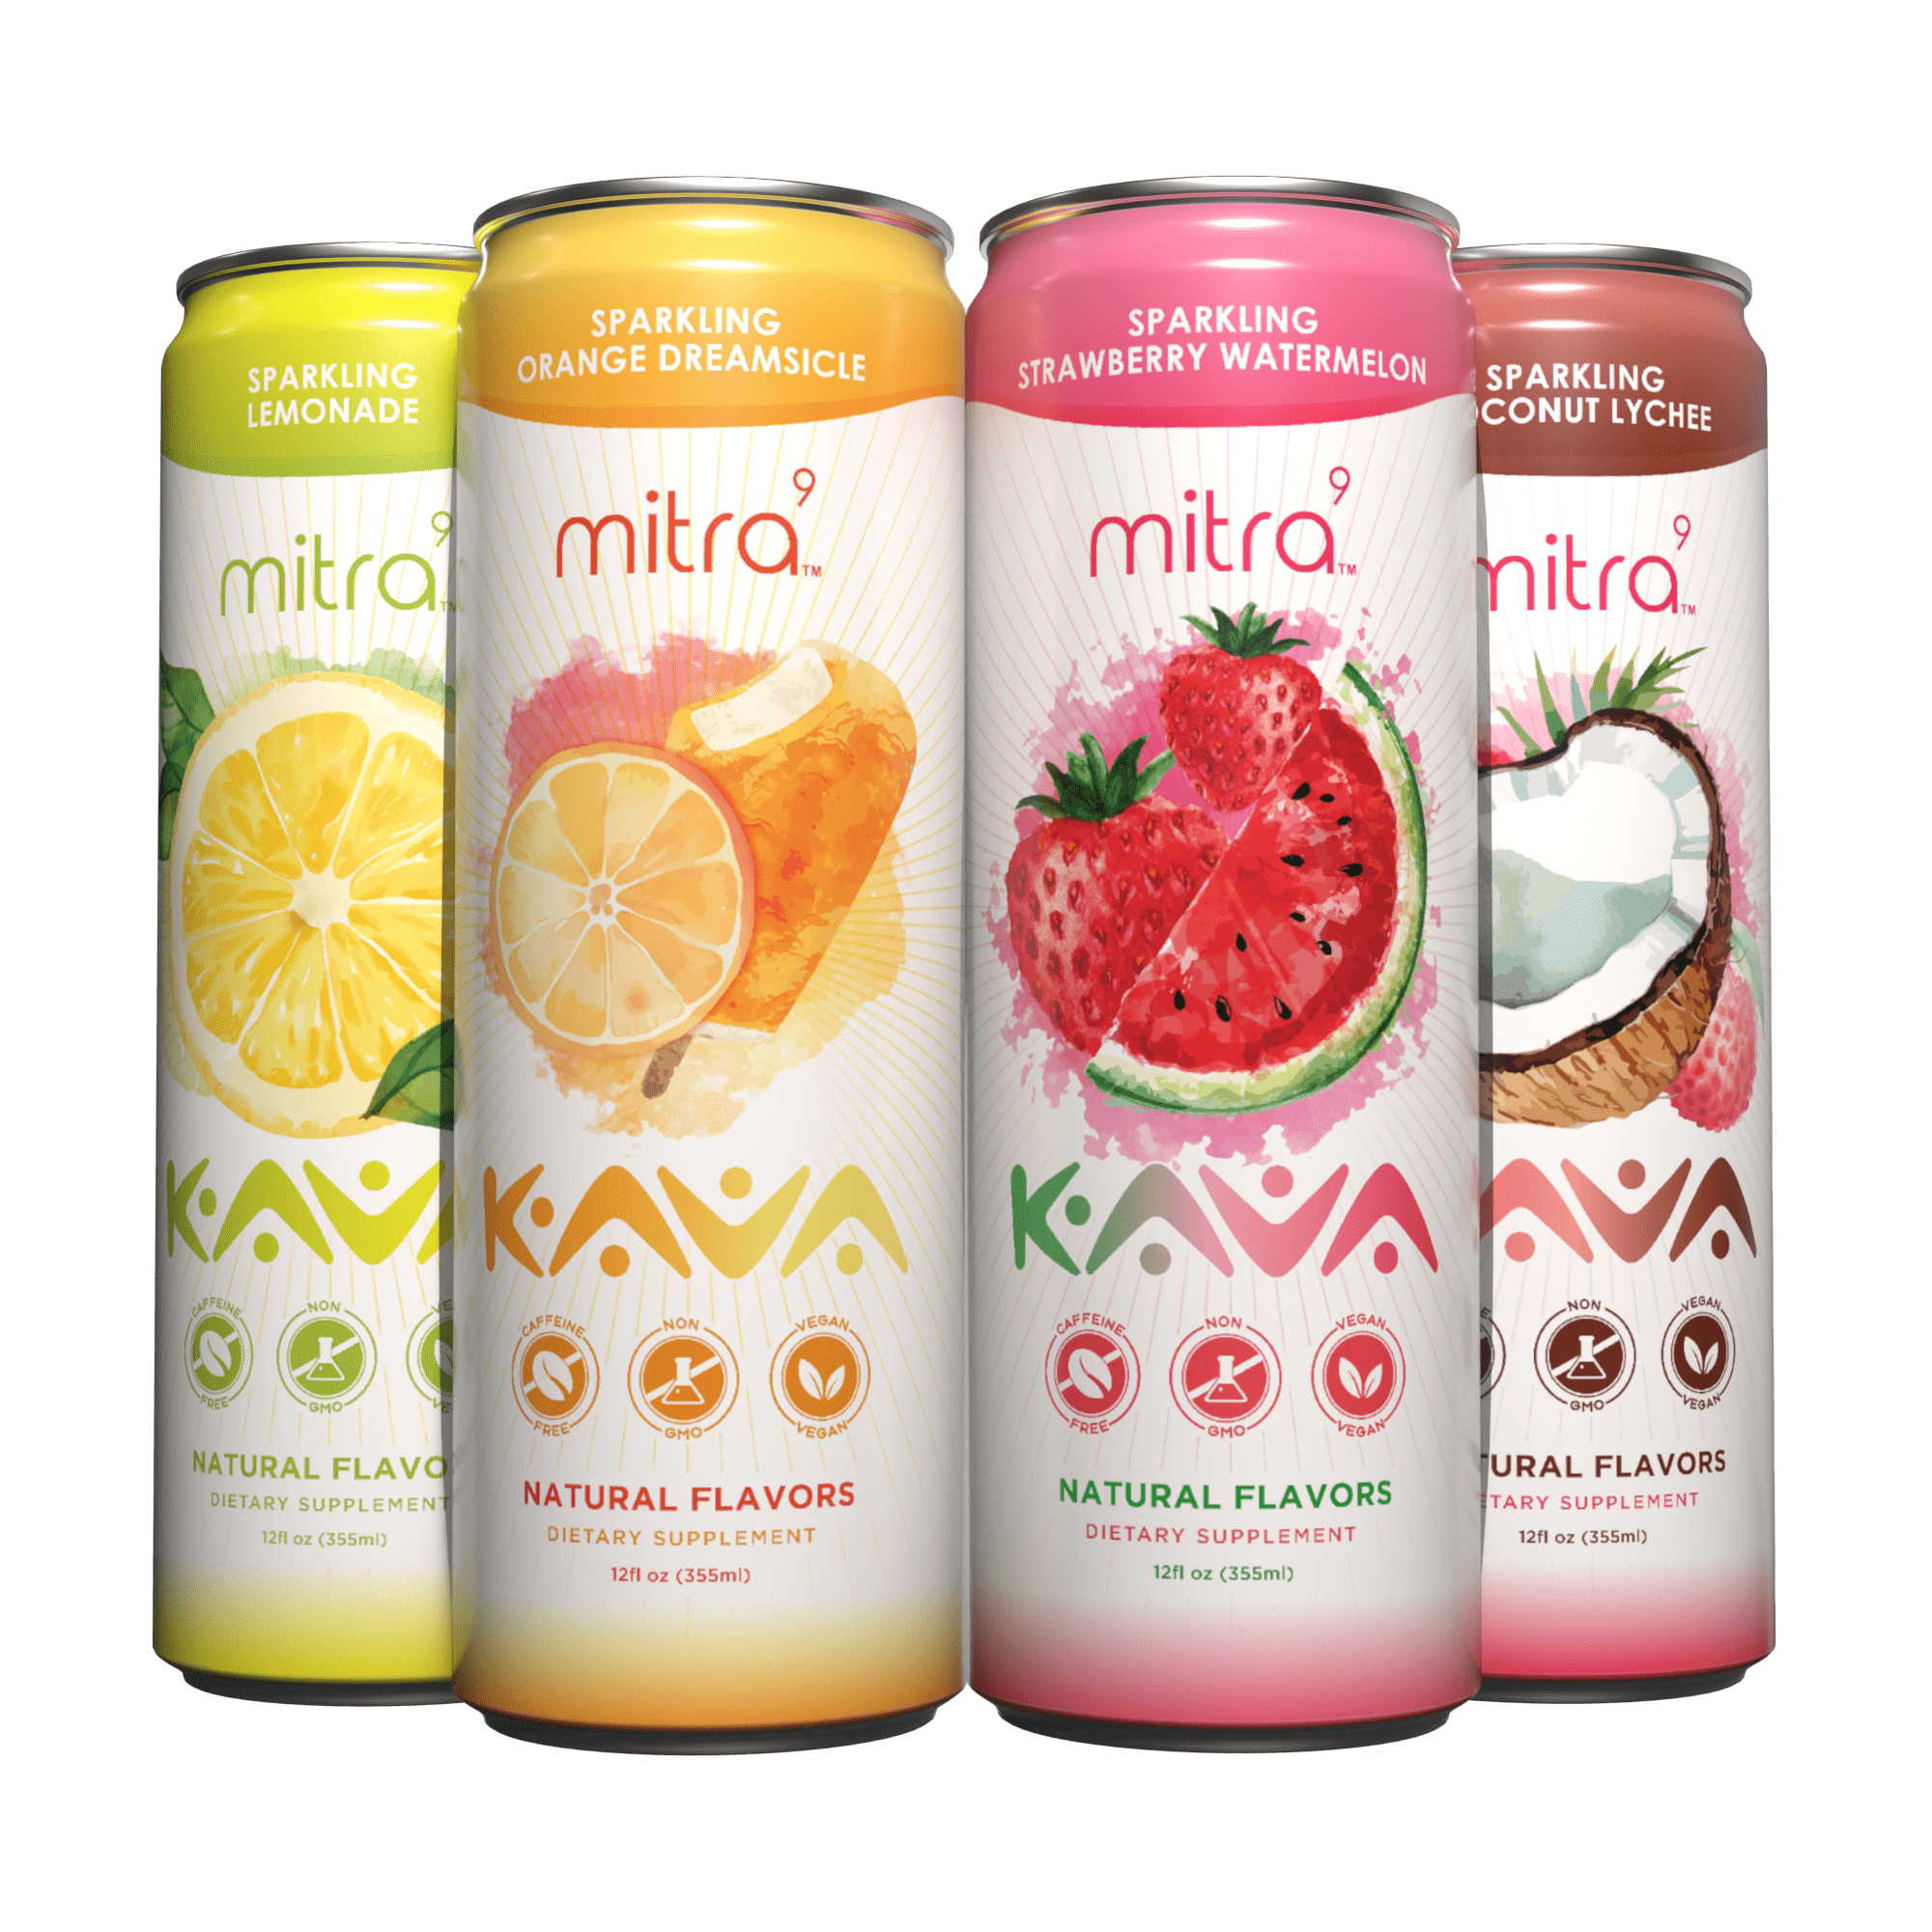 Kava Products